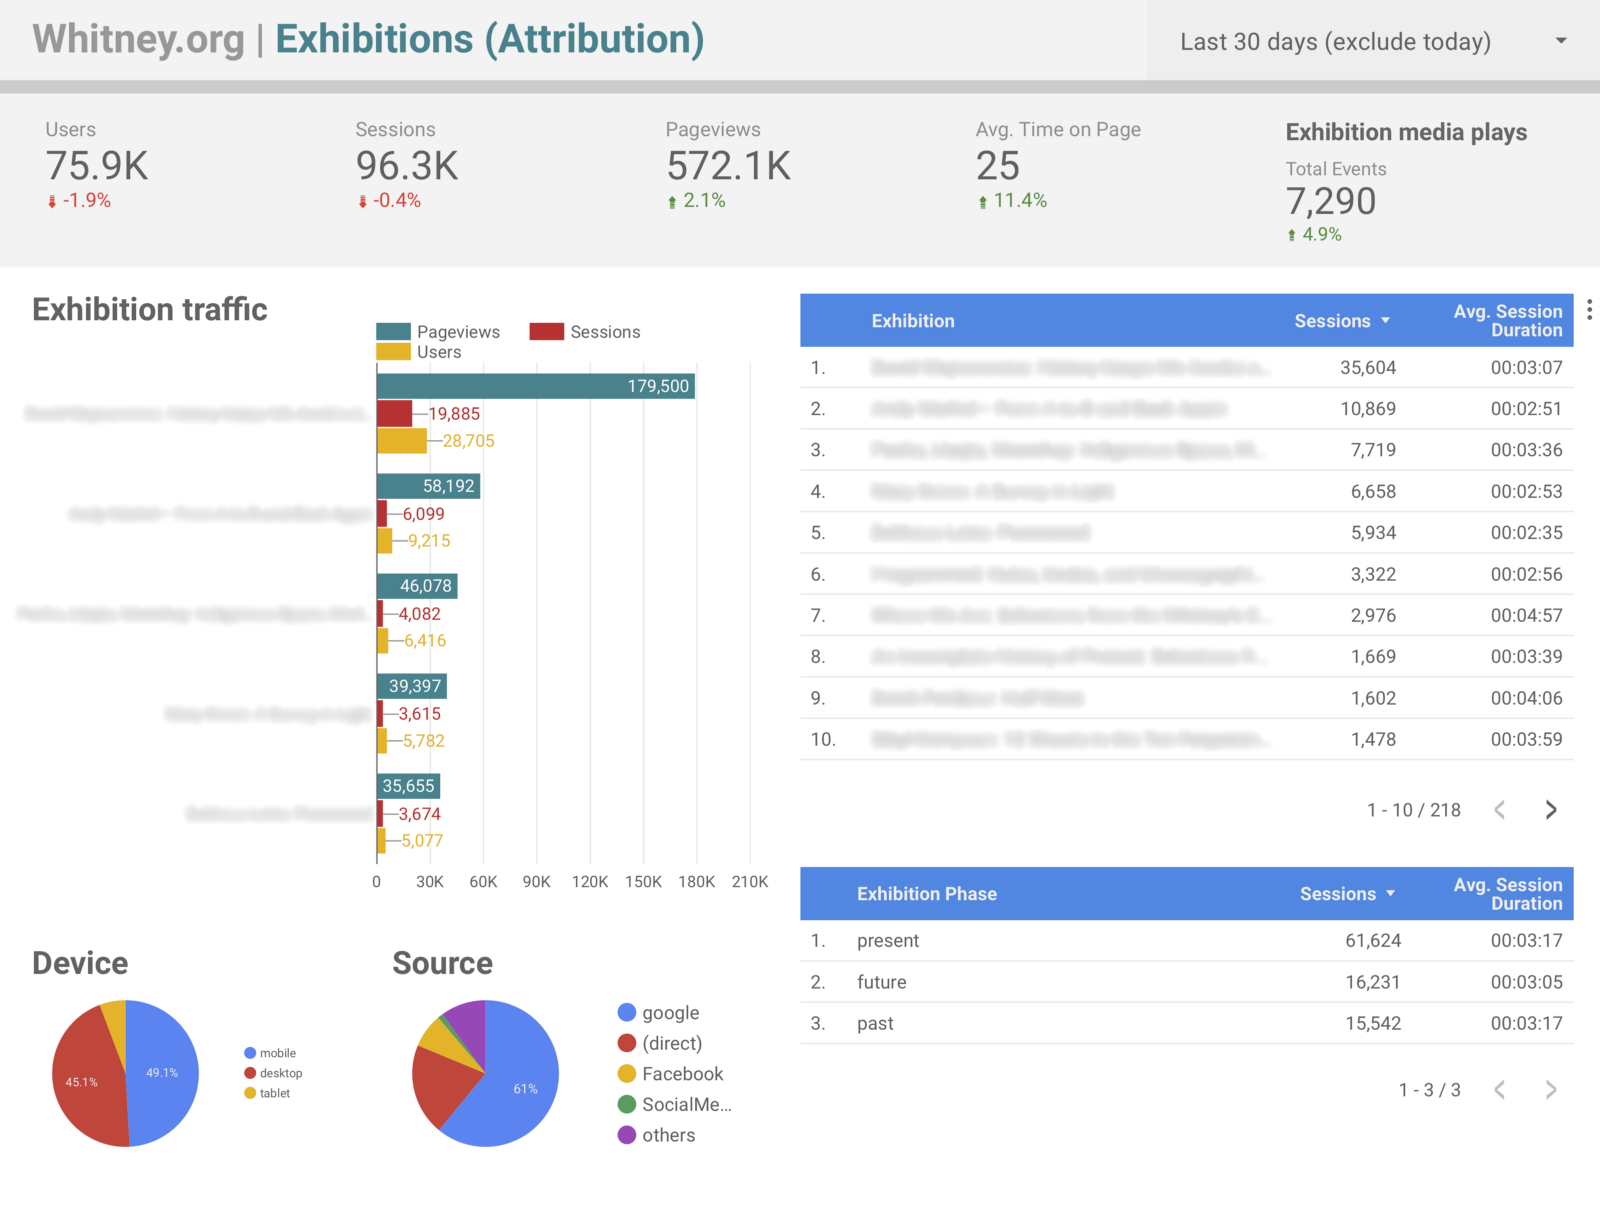 Screenshot of a data studio dashboard of exhibition related data from the last 30 days.